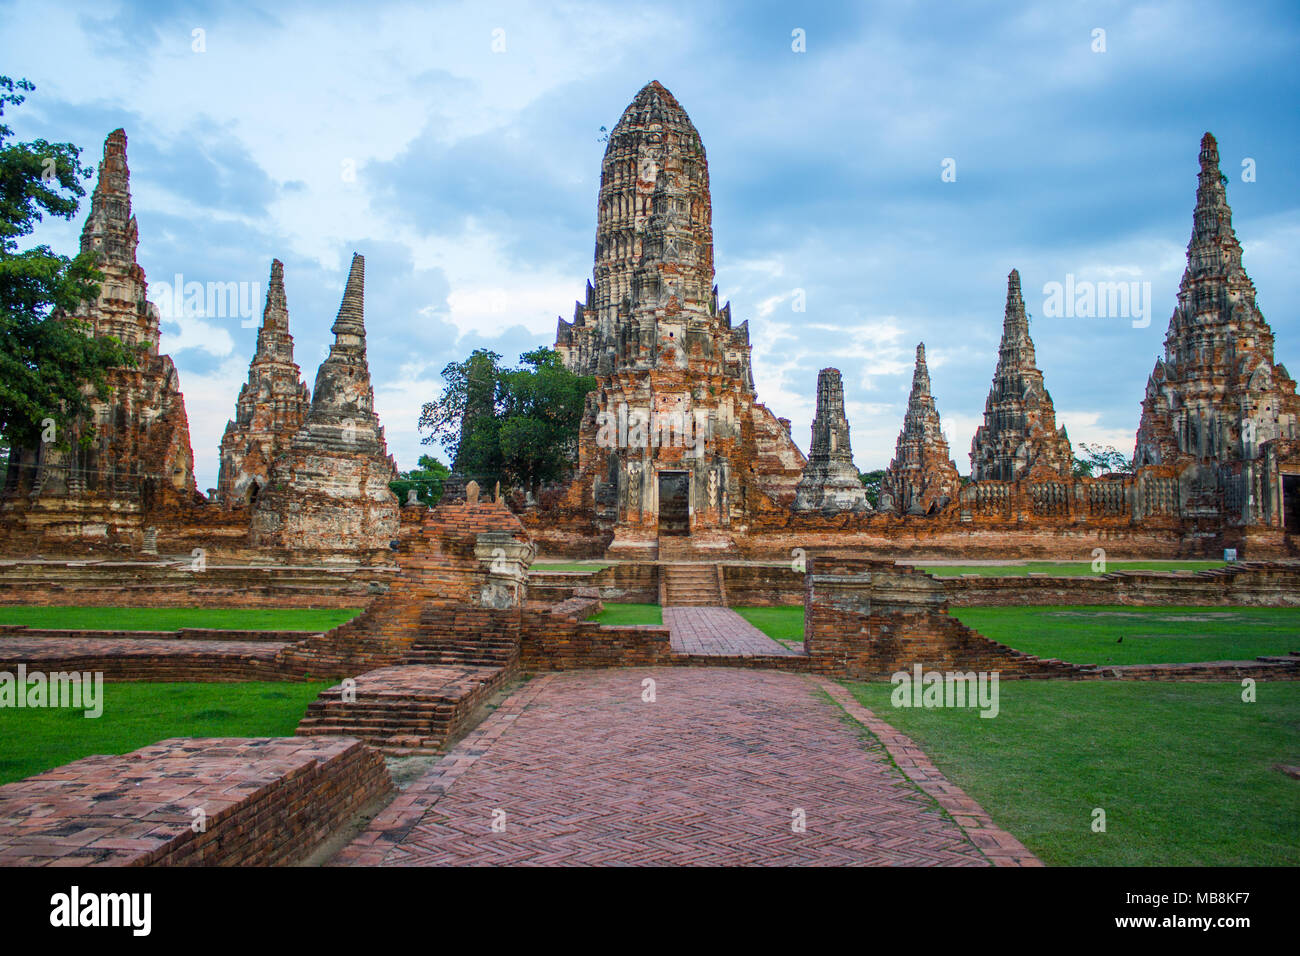 Wat Chaiwatthanaram is a Buddhist temple in the city of Ayutthaya Historical Park, Thailand Stock Photo